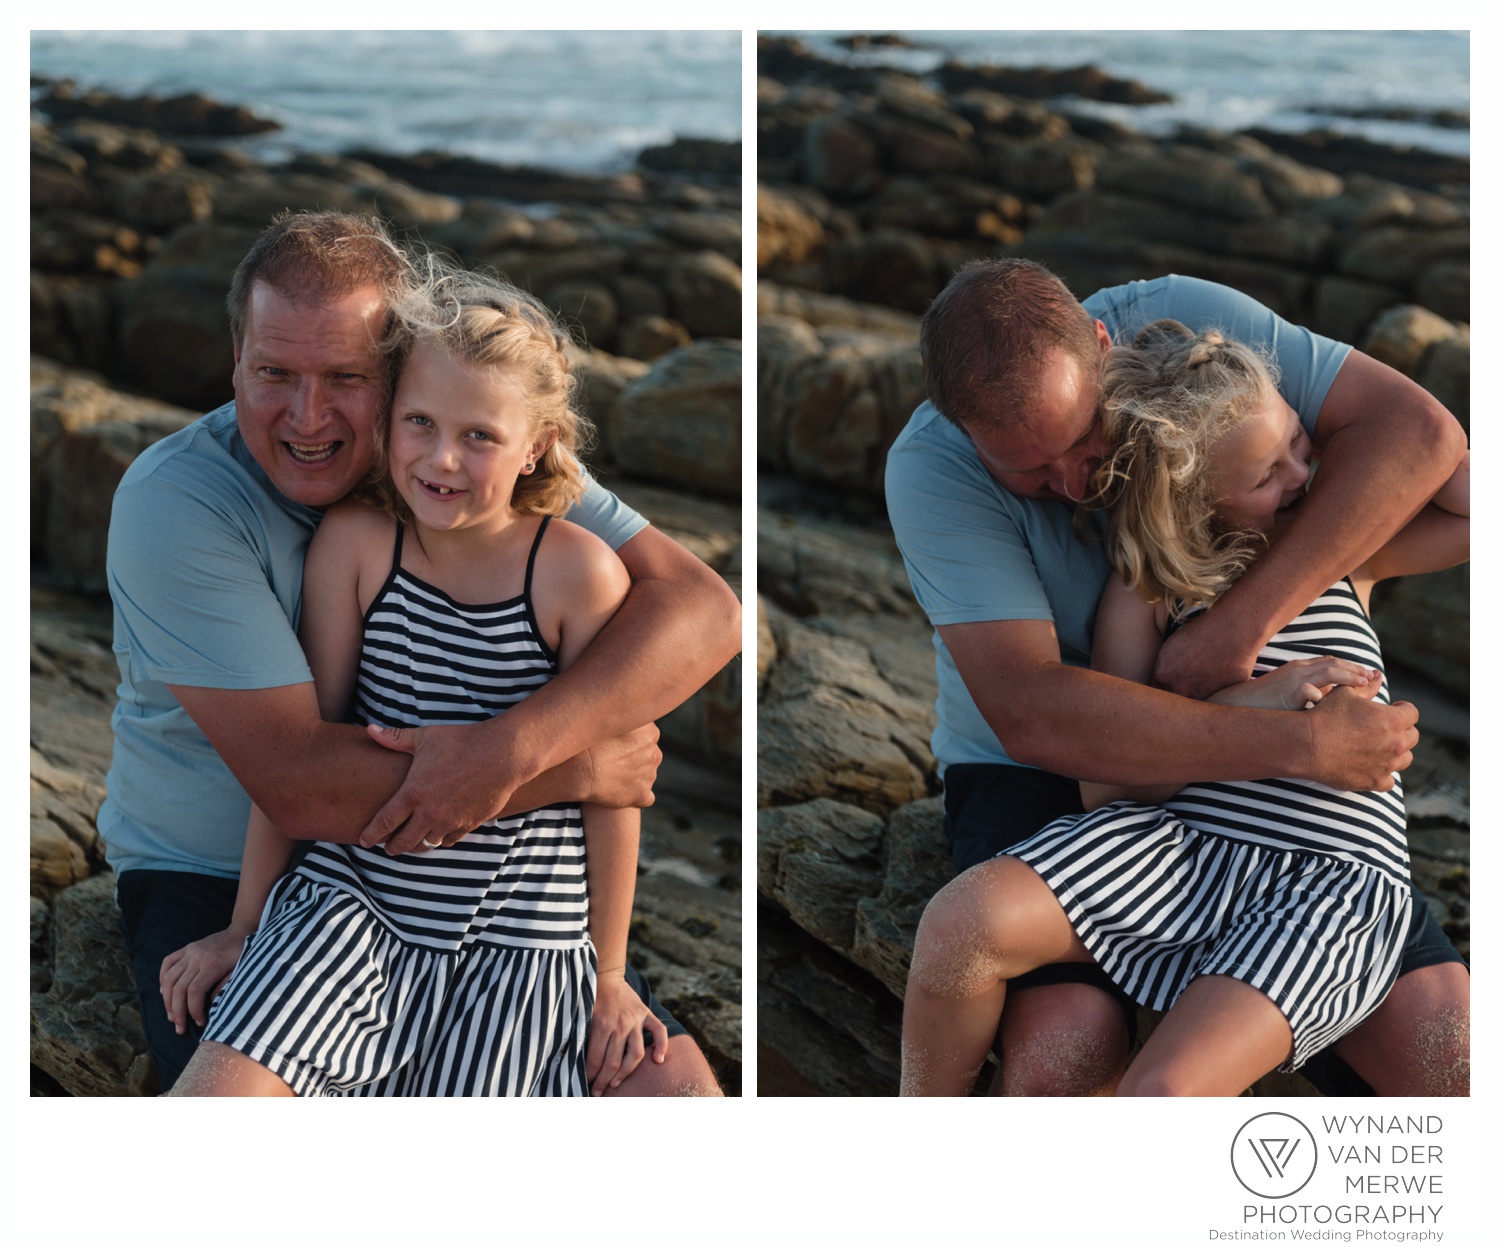 Super cute and beautiful family photos of Ruth du Toit and her family